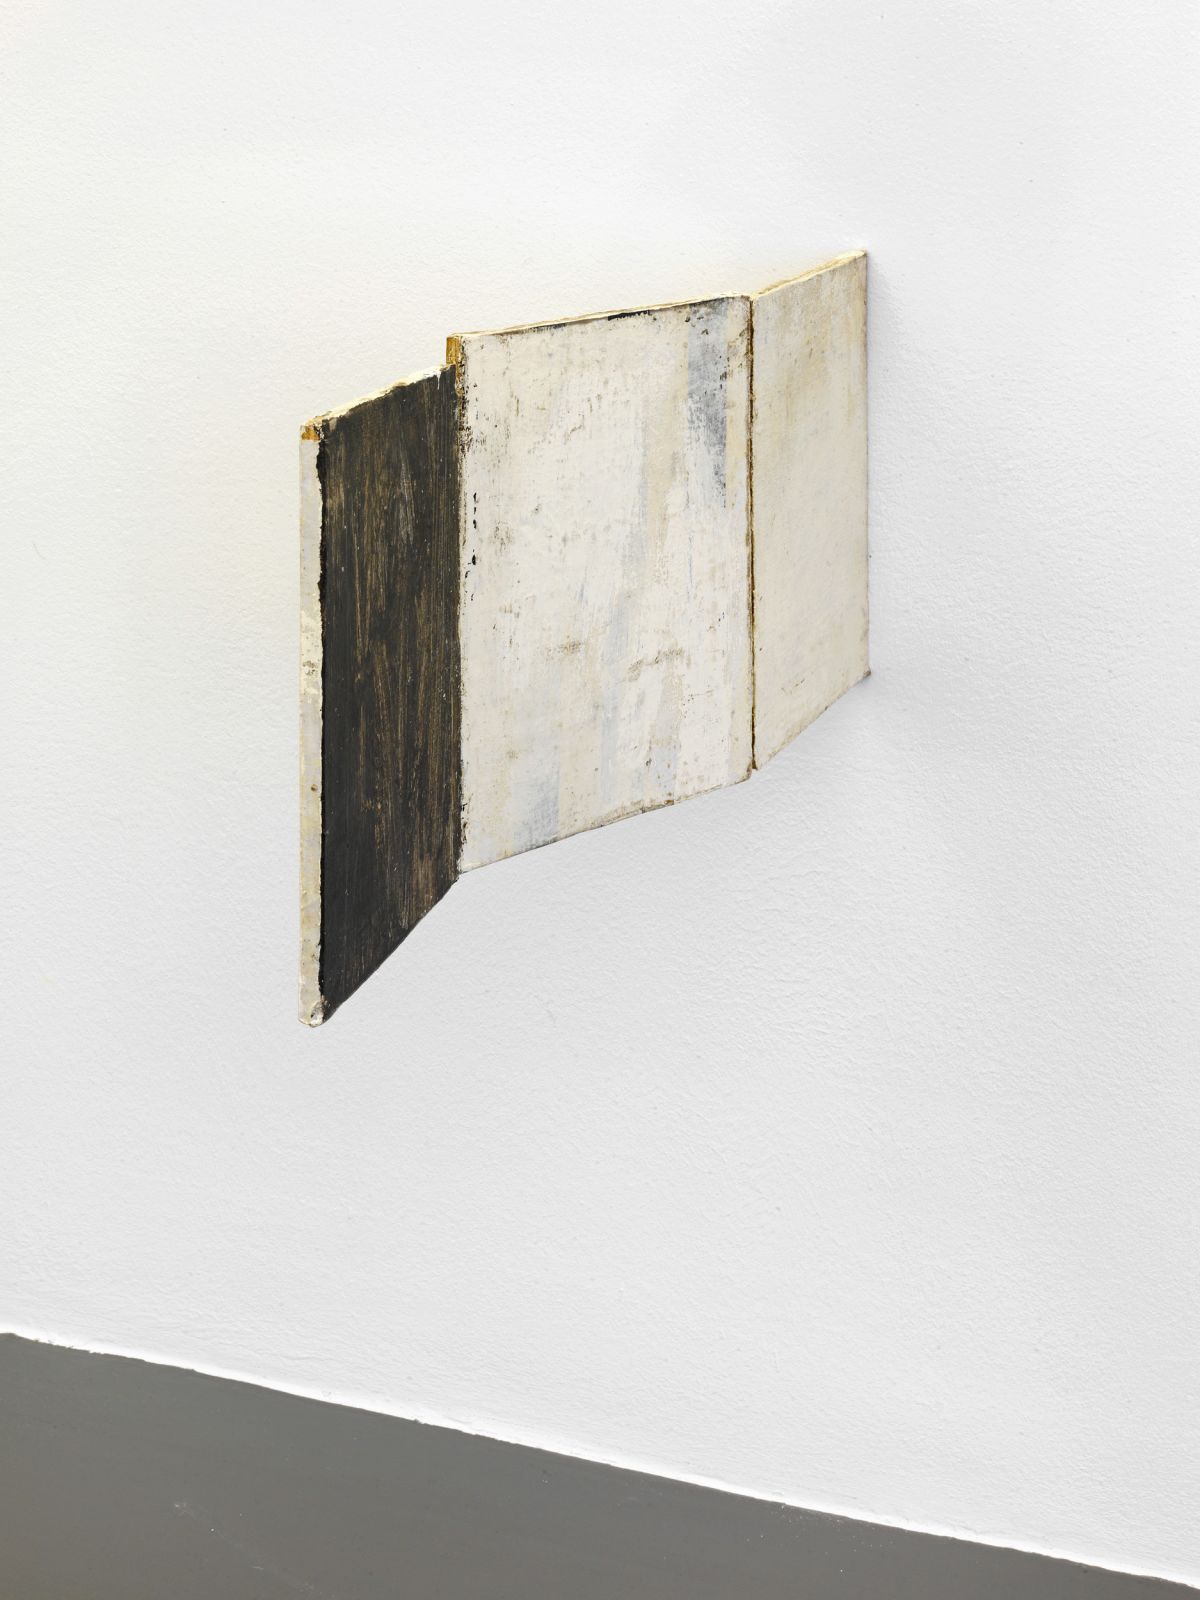 Lawrence Carroll, ‘Untitled (hinge painting)’, 2013